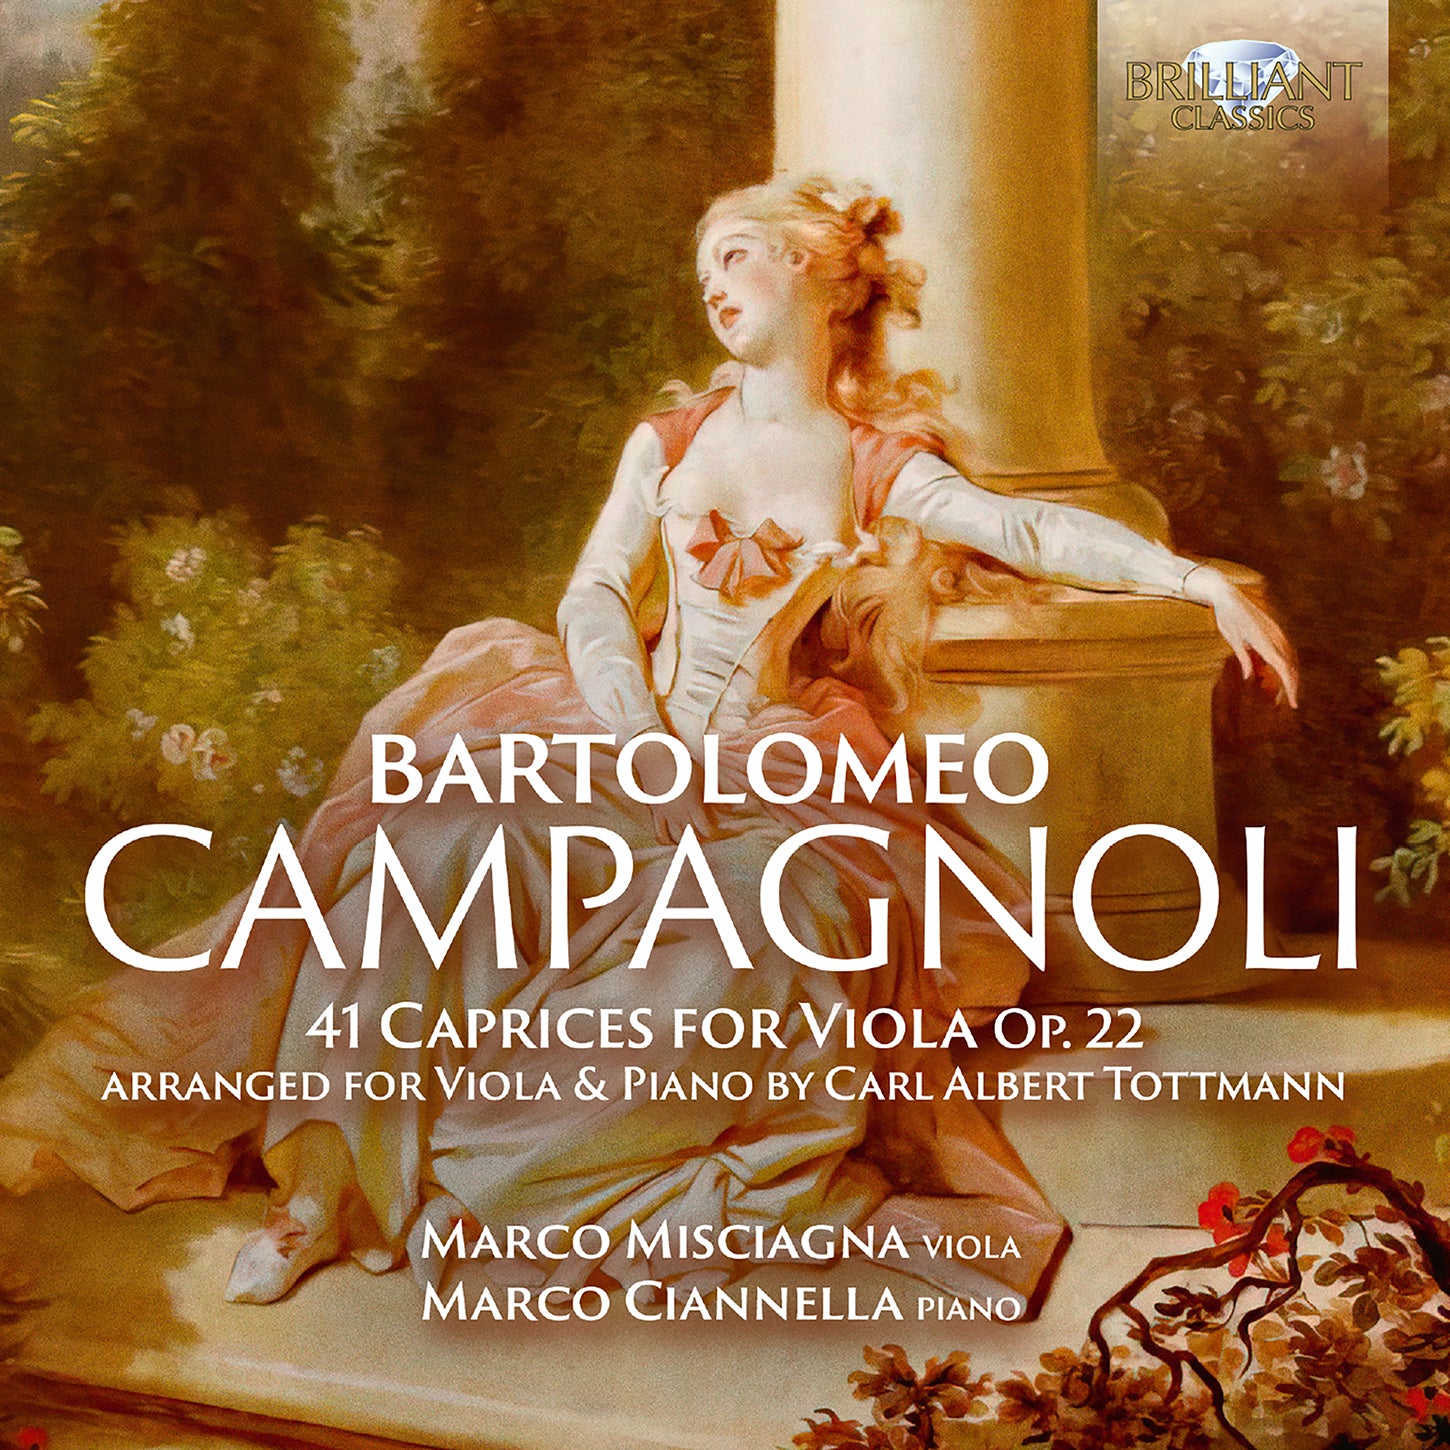 Campagnoli: 41 Caprices for Viola, Op.22, arranged for Viola & Piano by Carl Albert Tottmann